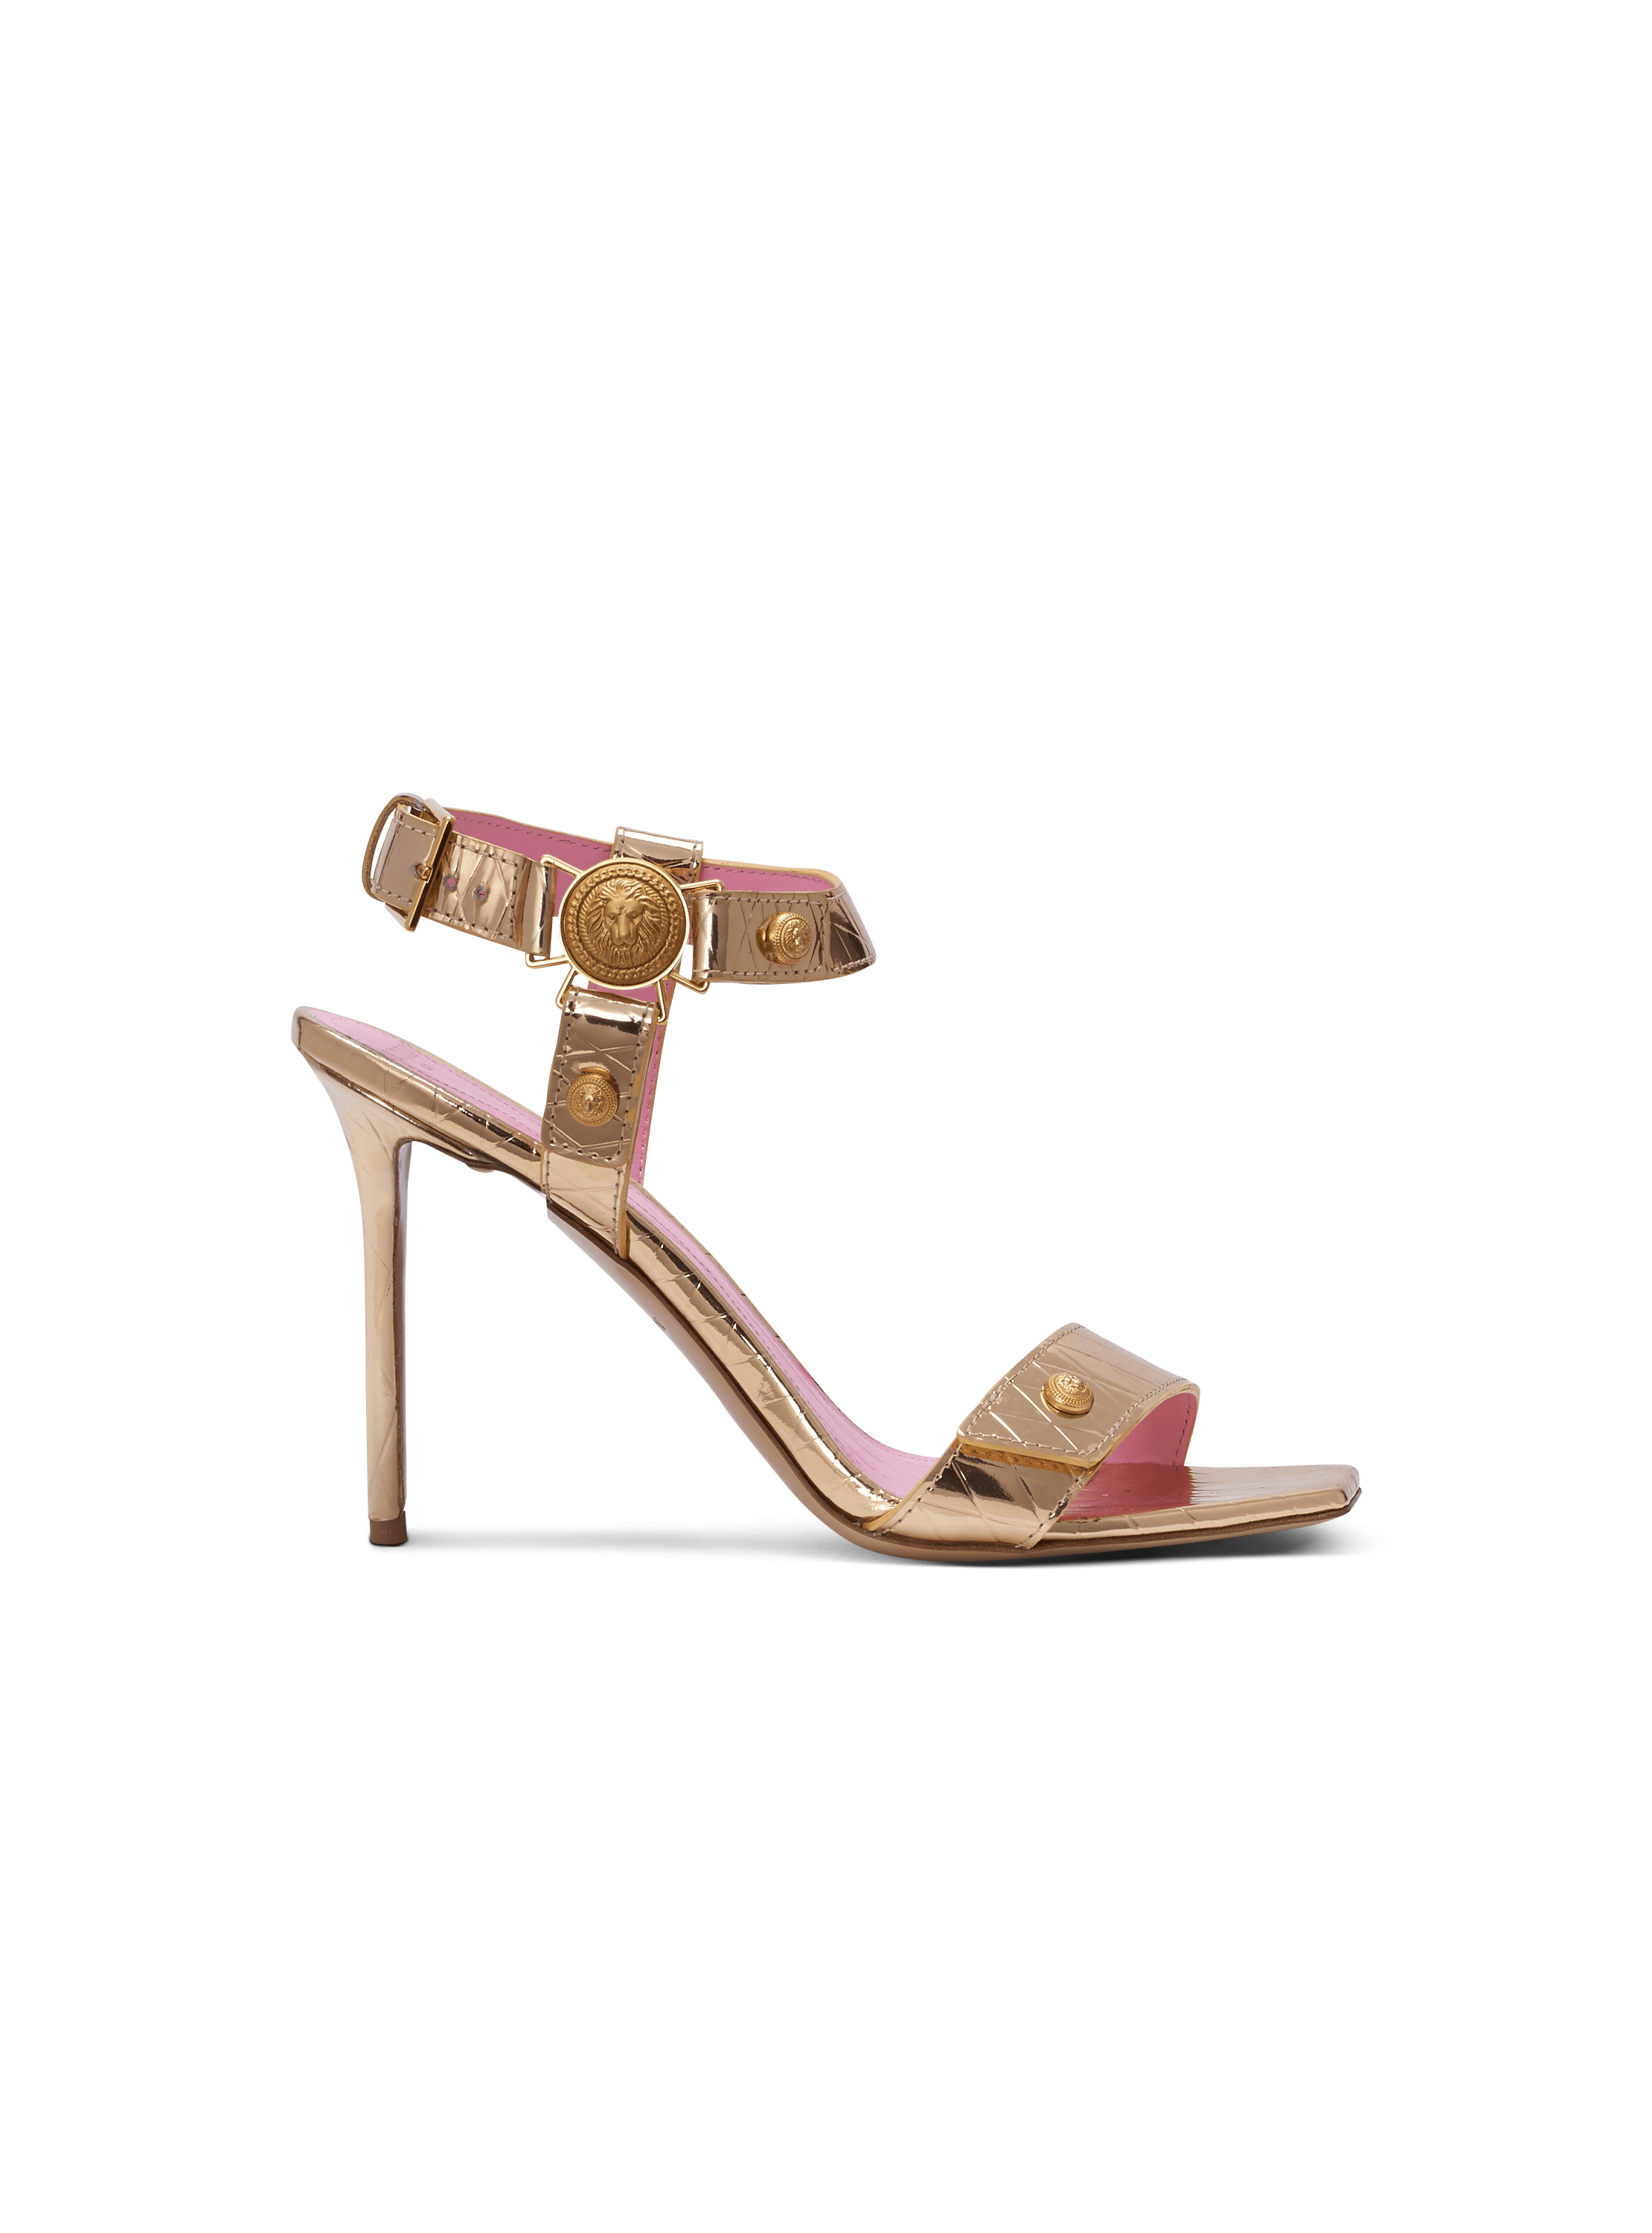 Heeled Eva sandals in mirrored leather